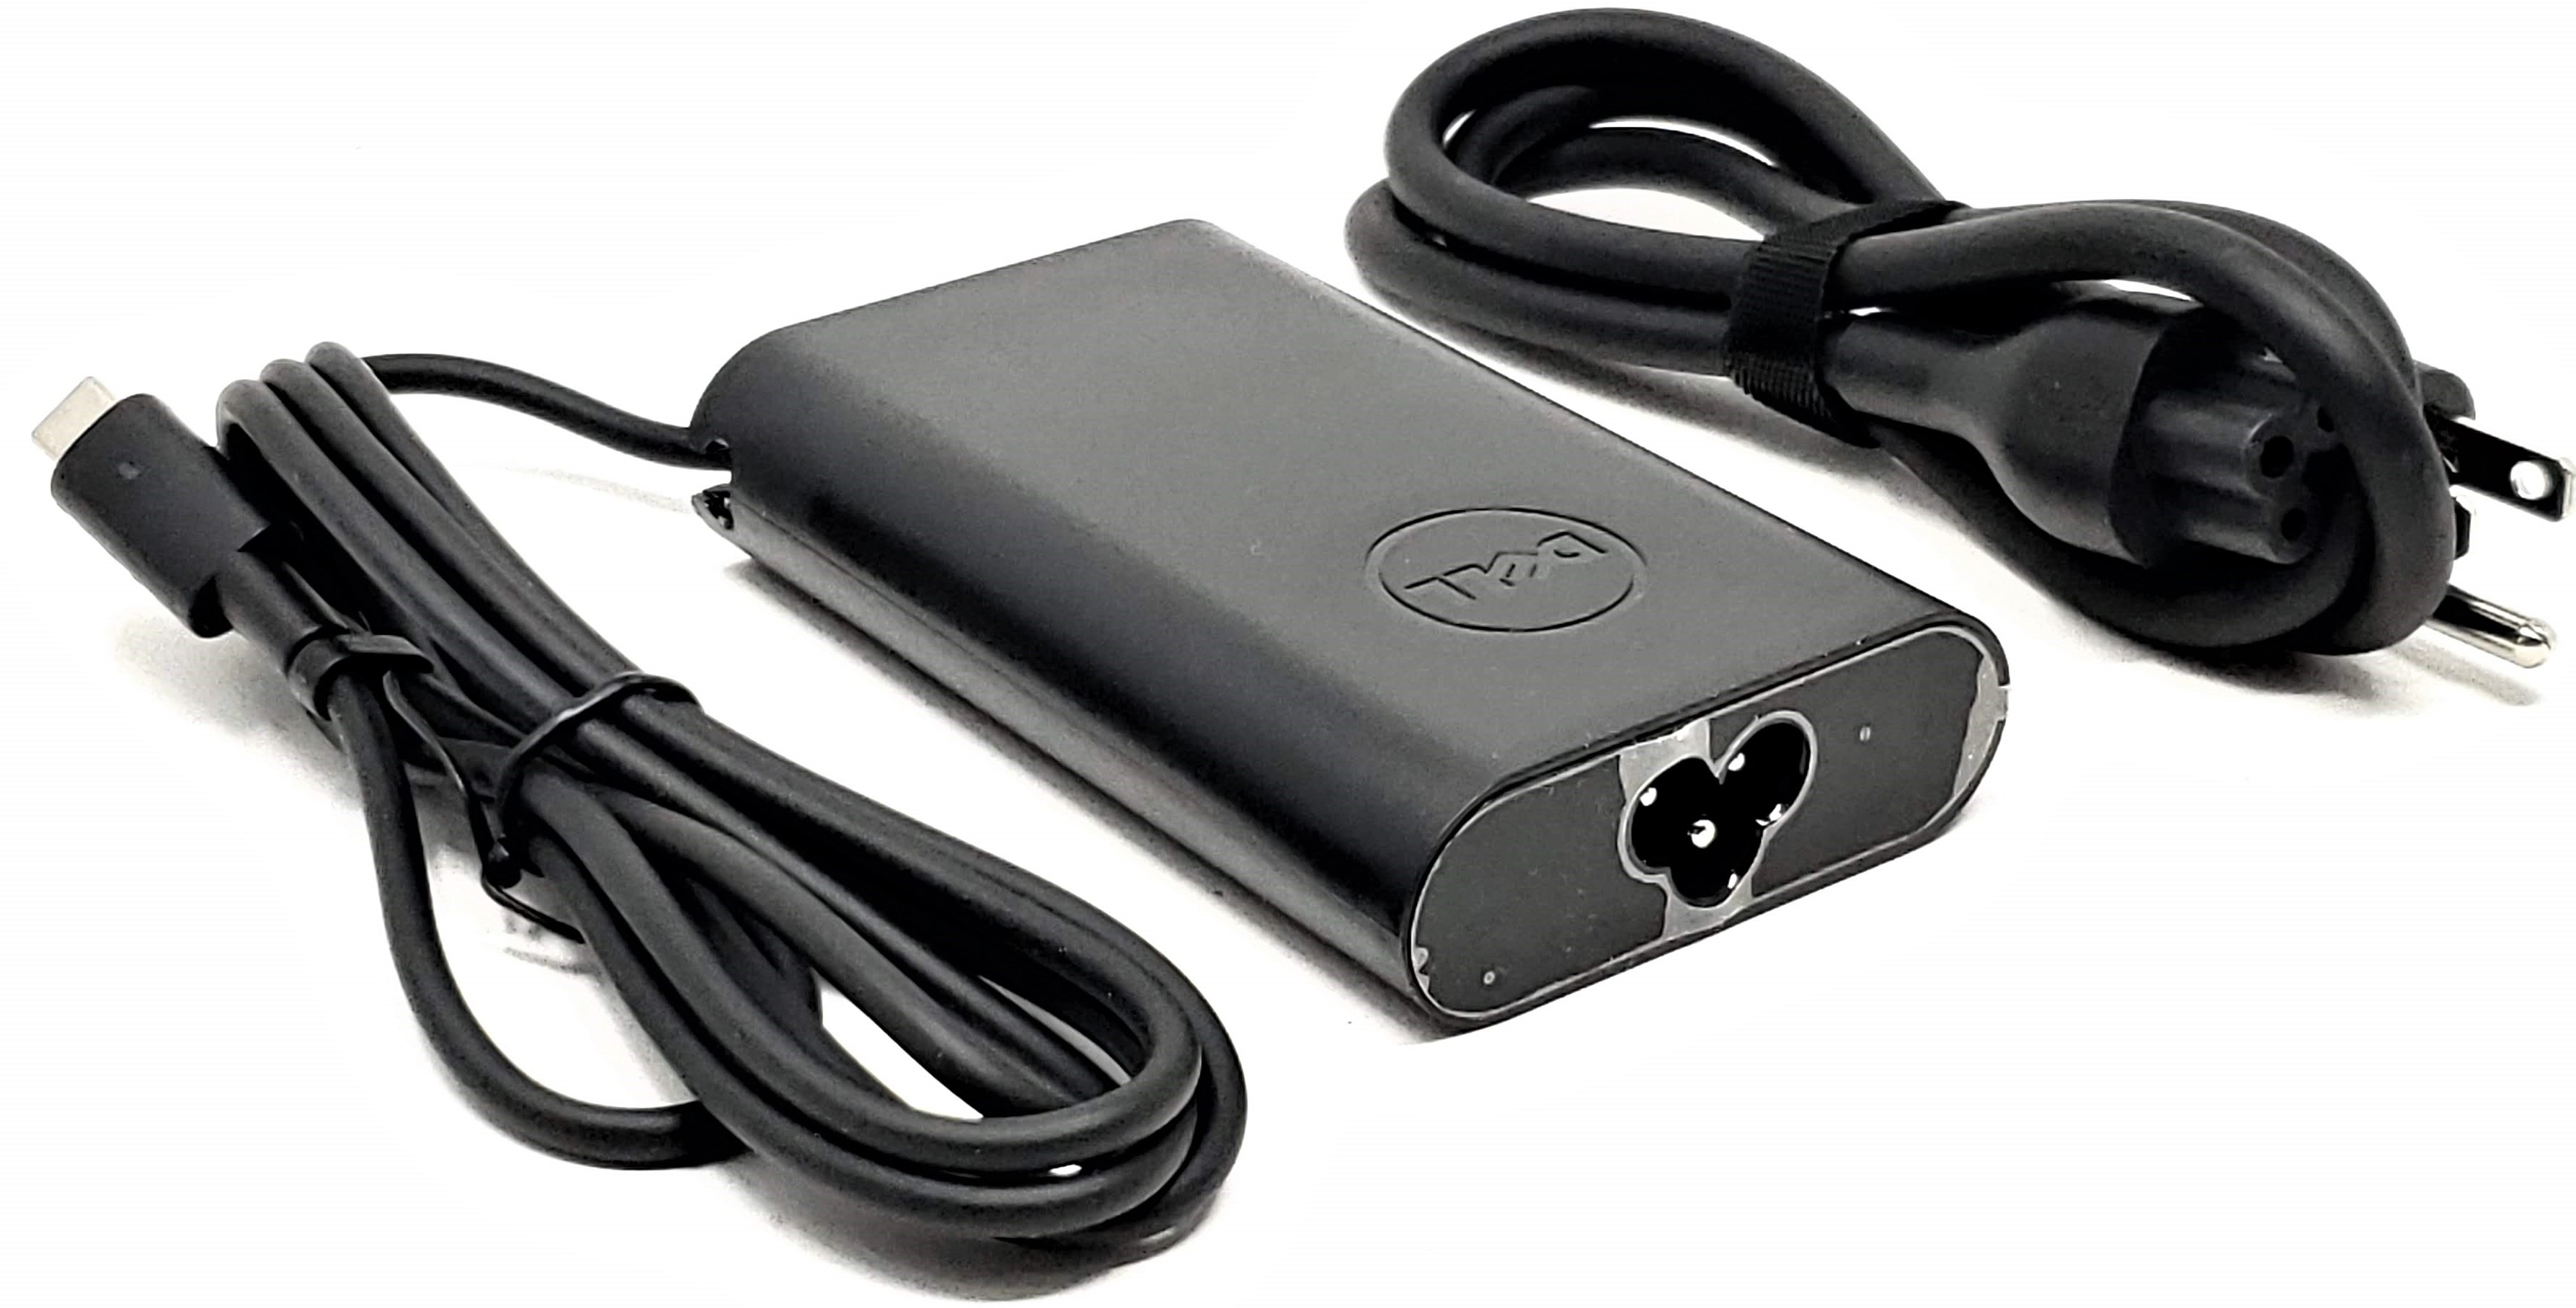 - USB-C AC Adapter Charger for Dell Latitude 11 7285 7275 7370 XPS 13 9370 9365 9360 - CPU Medics